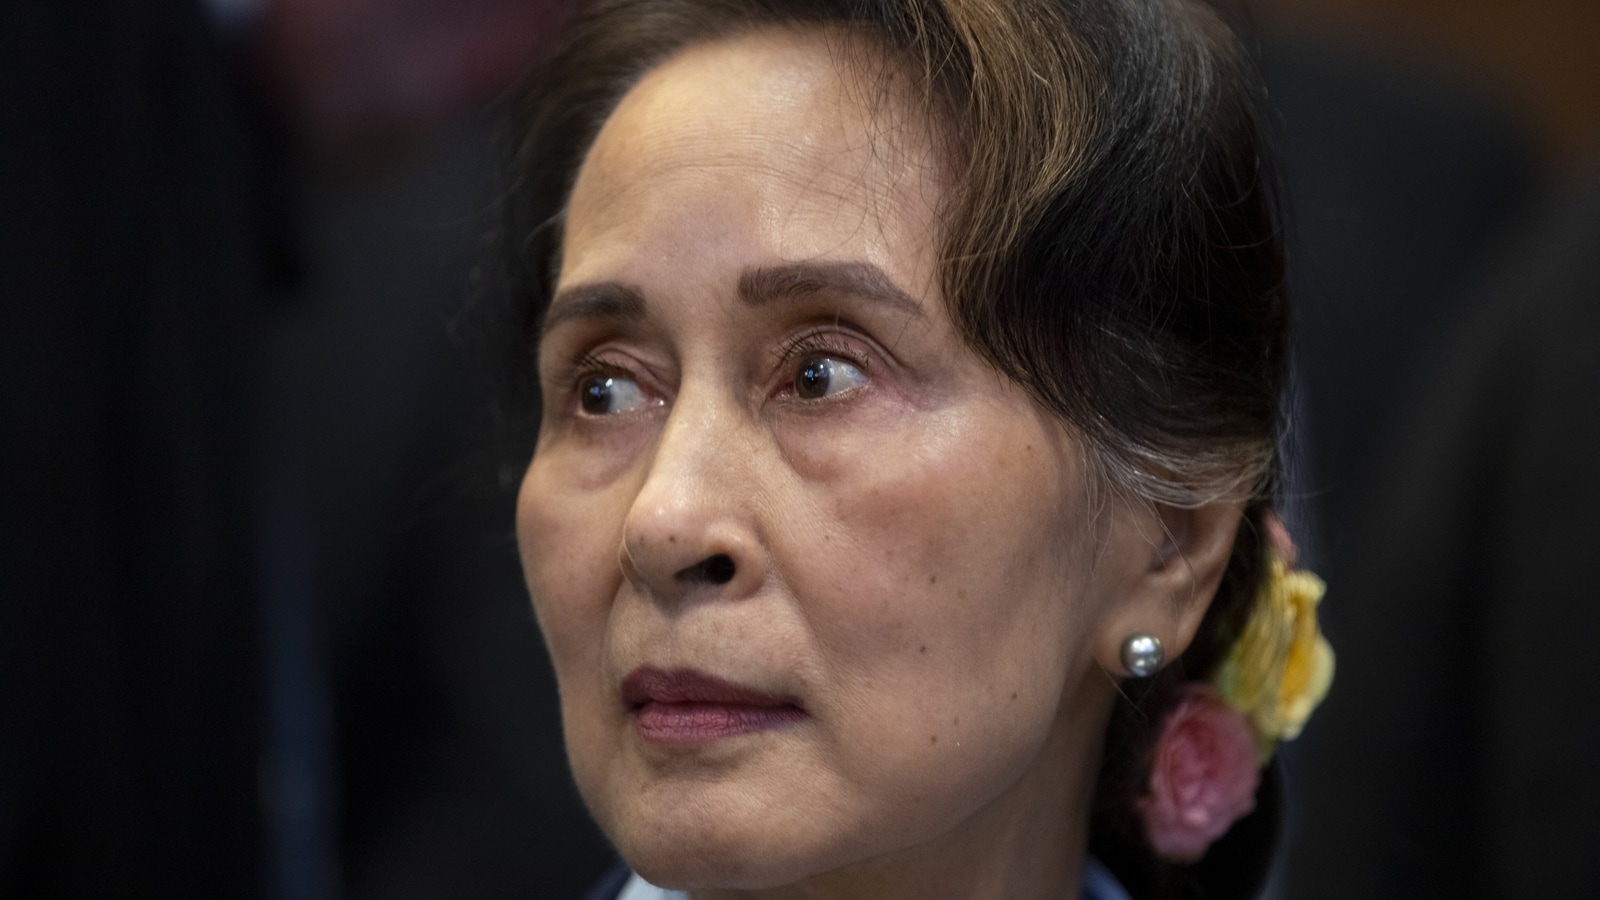 Myanmar's Suu Kyi convicted again, Australian economist gets 3 years in jail  – The Squadron News